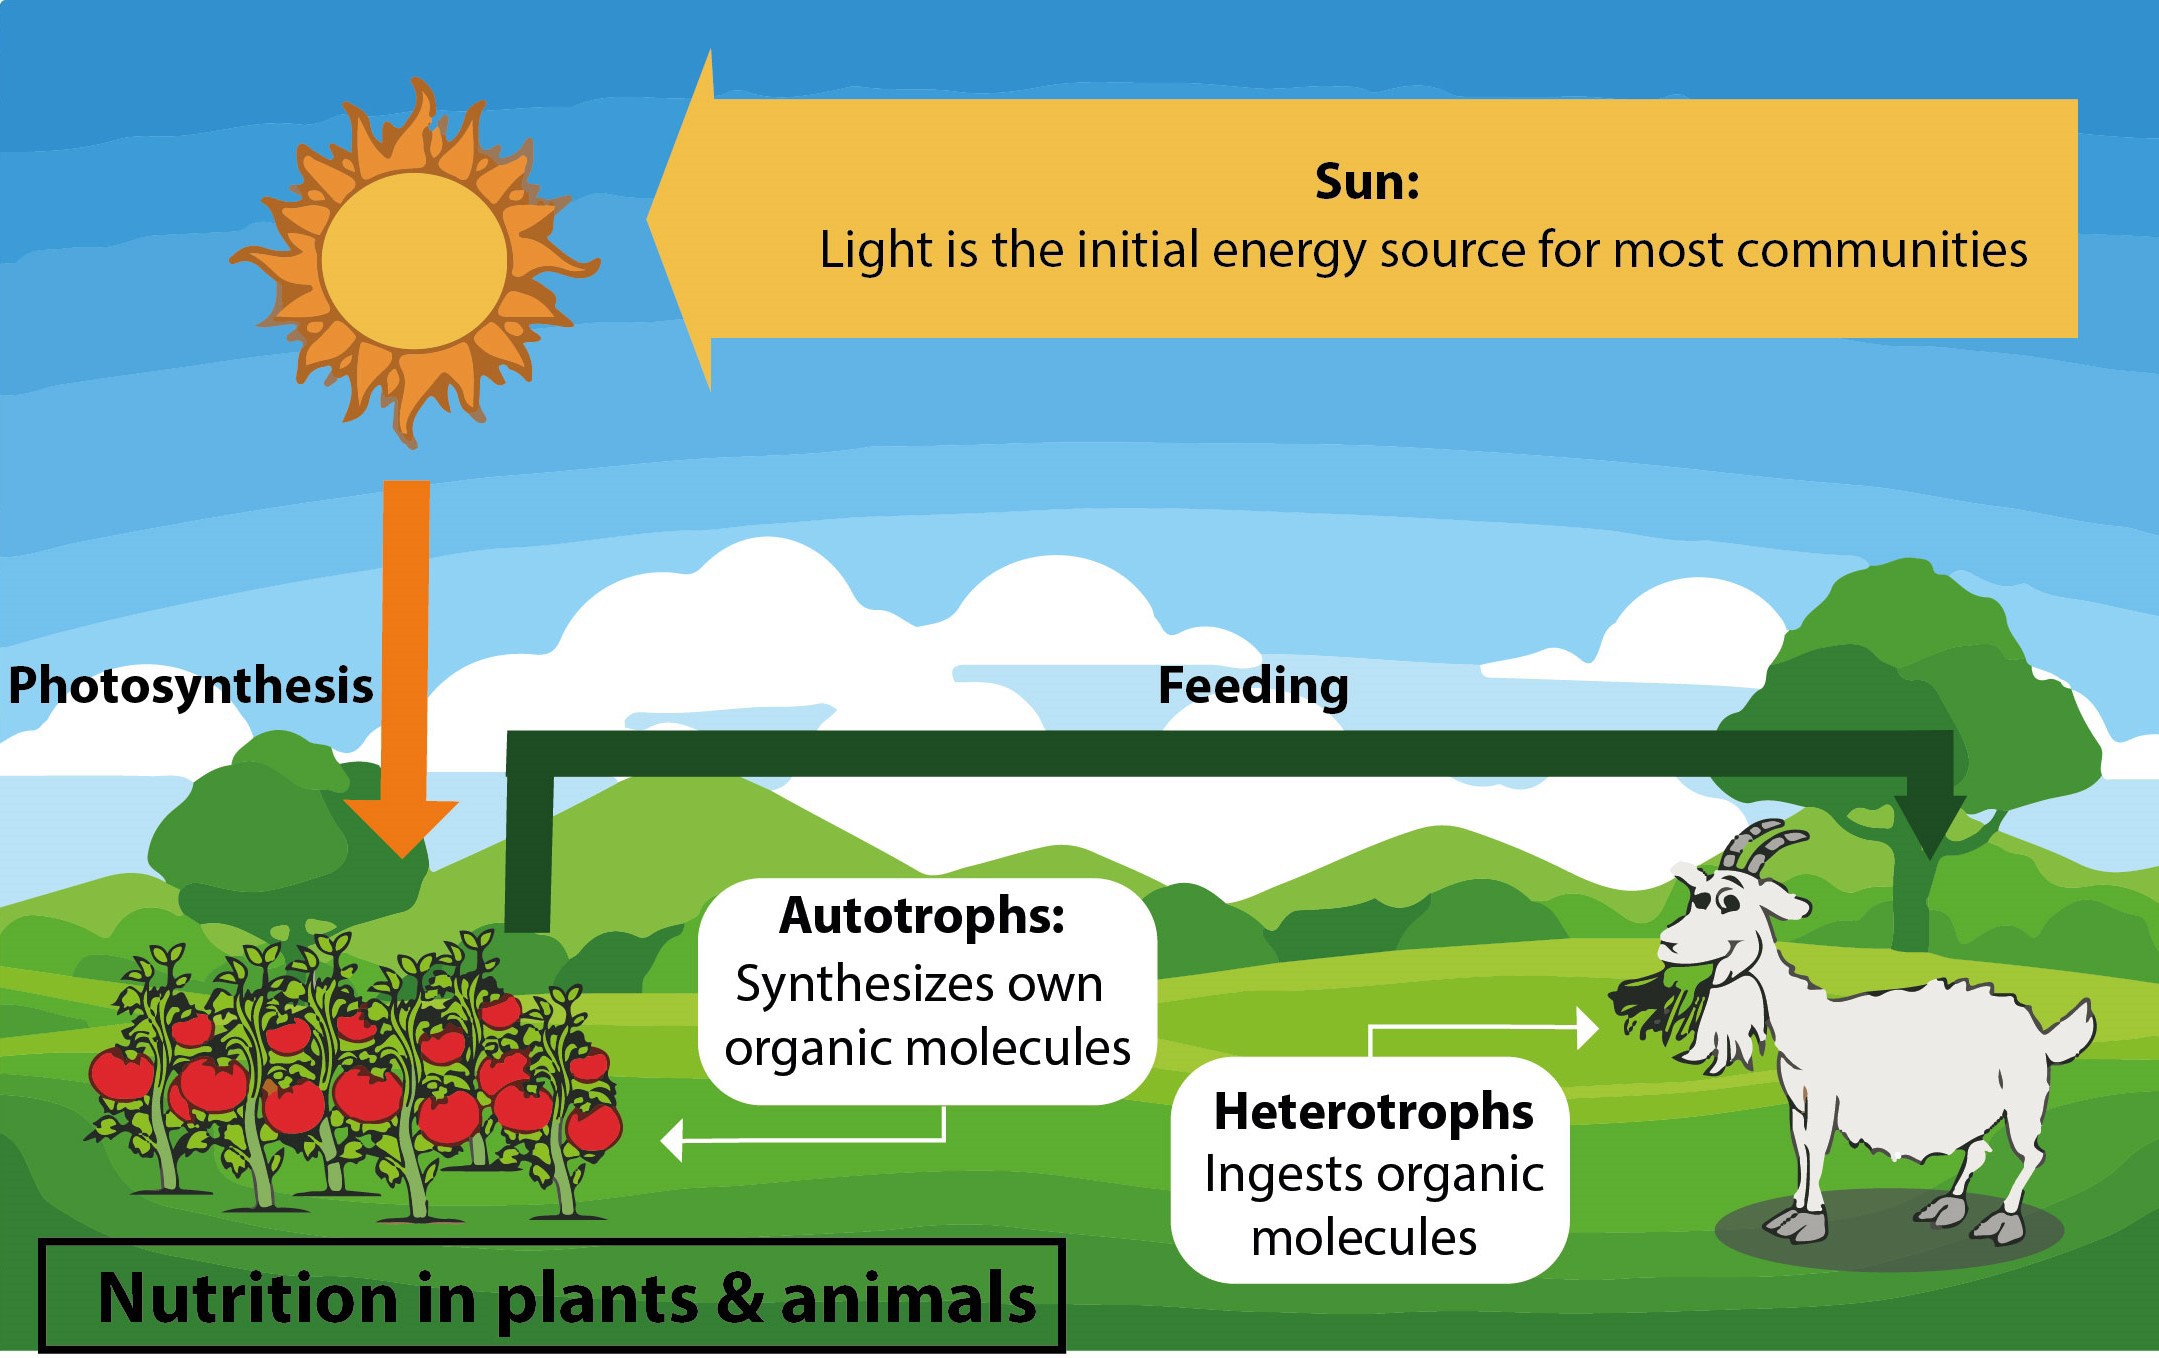 On what basis are plants and animals put into different categories?